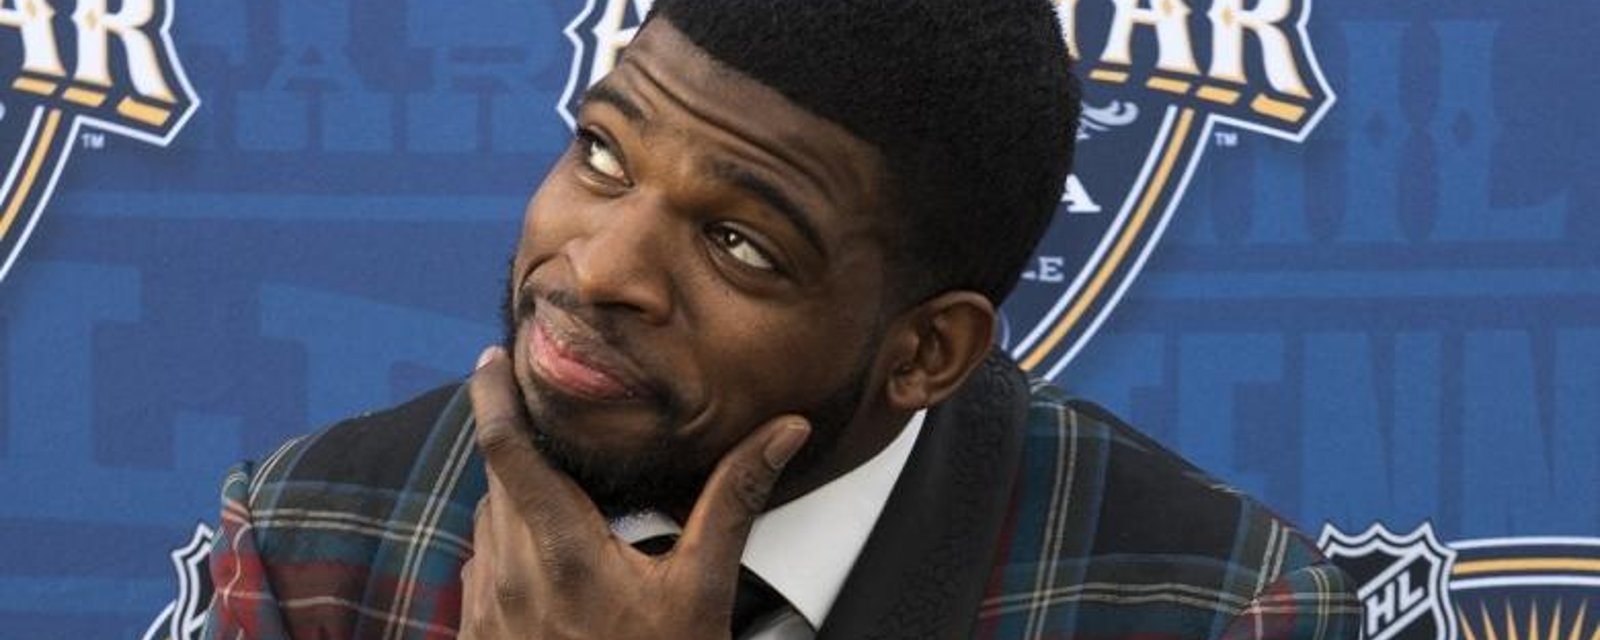 Latest update leaves little doubt on P.K. Subban trade rumors.